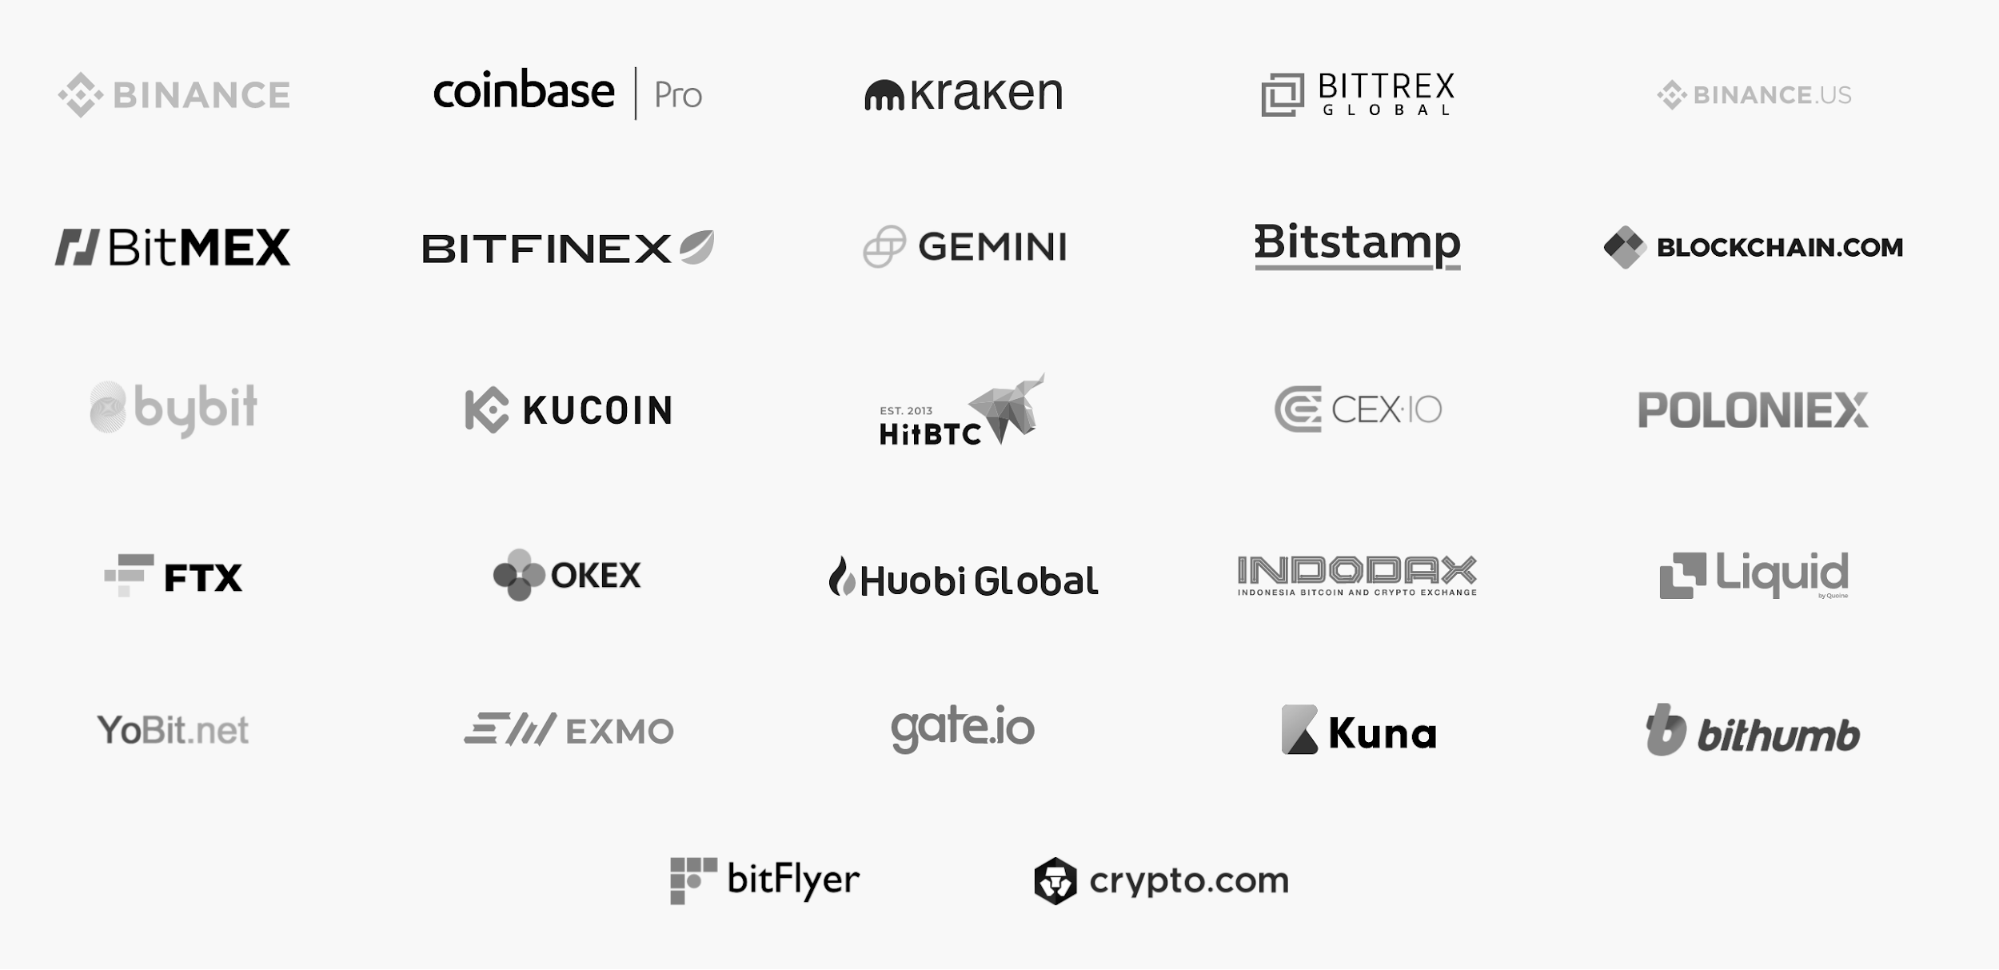 Having a wide list of supported exchanges and the ability to execute trades on top of it, allows Good Crypto to provide an outstanding user experience unmatched by competitors.